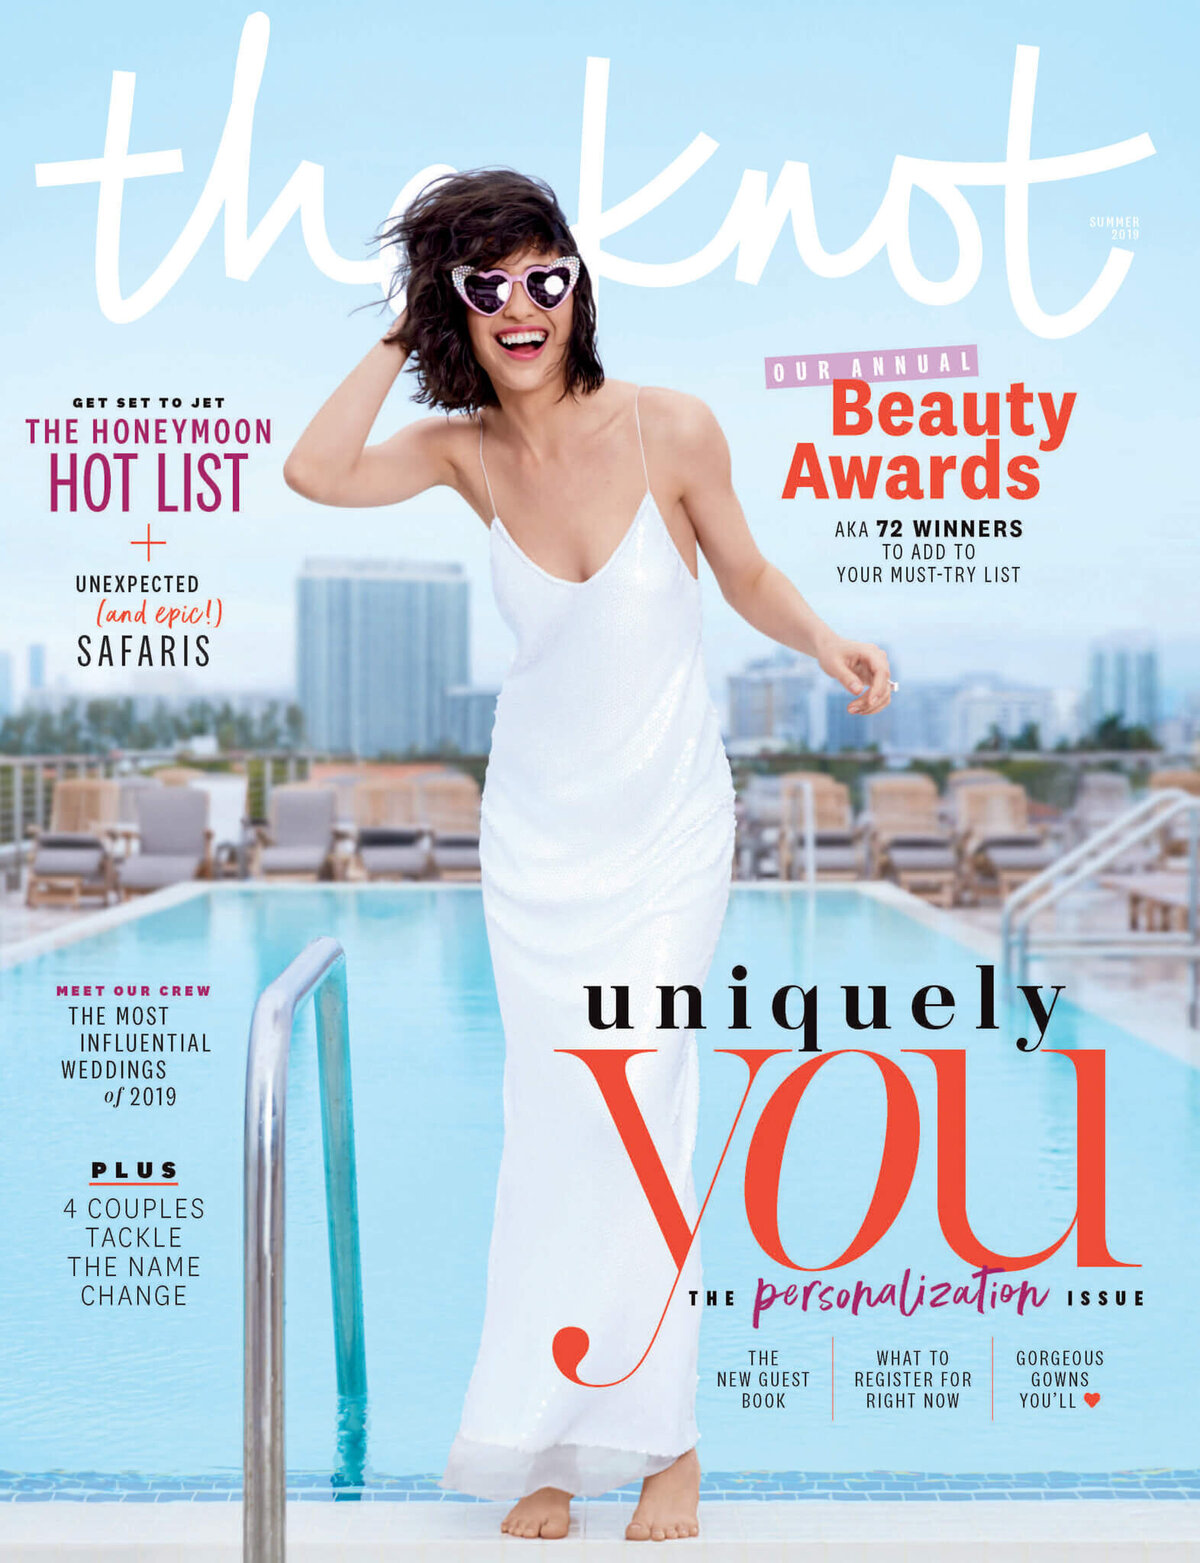 A bride is standing in front of a swimming pool in a The Knot Magazine cover.